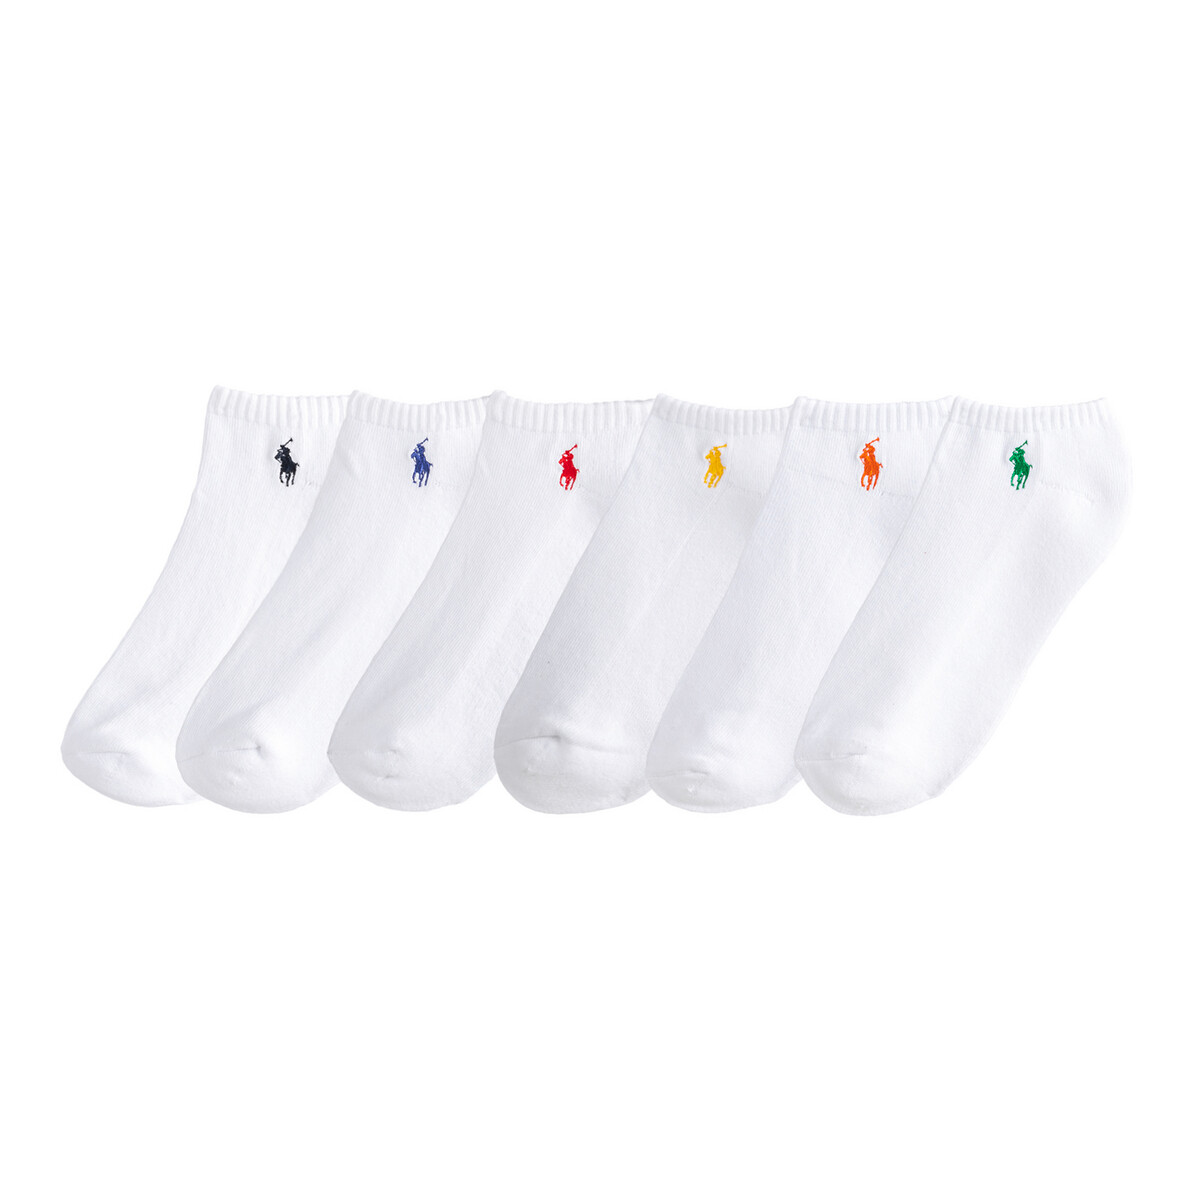 Image of Pack of 6 Pairs of Socks in Cotton